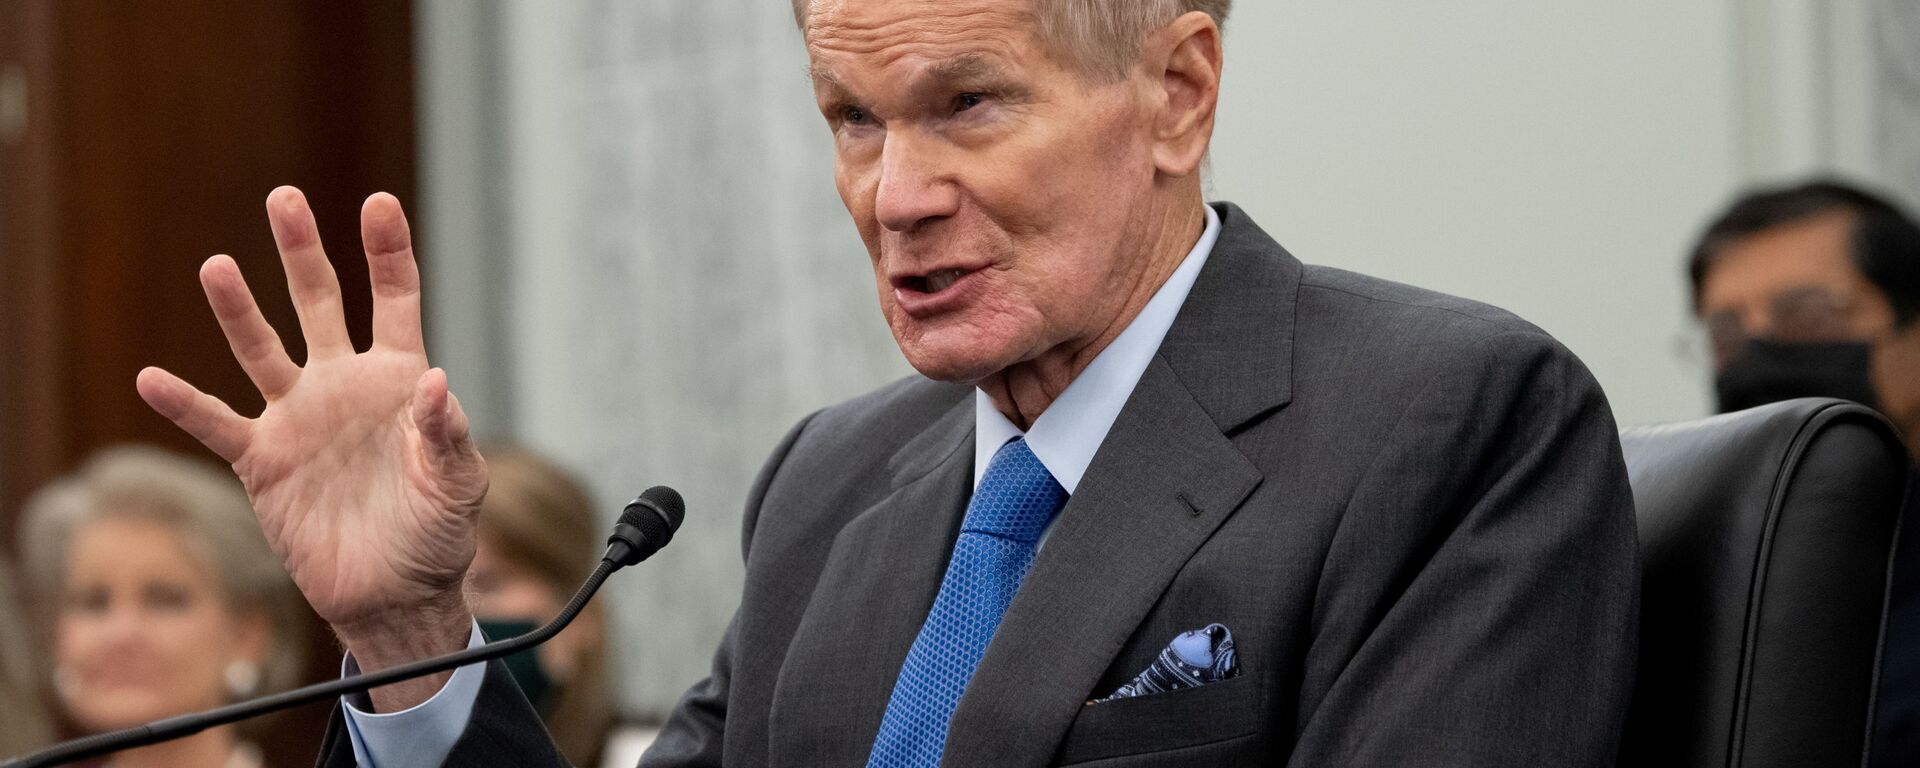 Former US Senator Bill Nelson, nominee to be administrator of NASA, testifies during a  Senate Committee on Commerce, Science, and Transportation confirmation hearing on Capitol Hill in Washington, DC, U.S. April 21, 2021. - Sputnik International, 1920, 25.08.2021